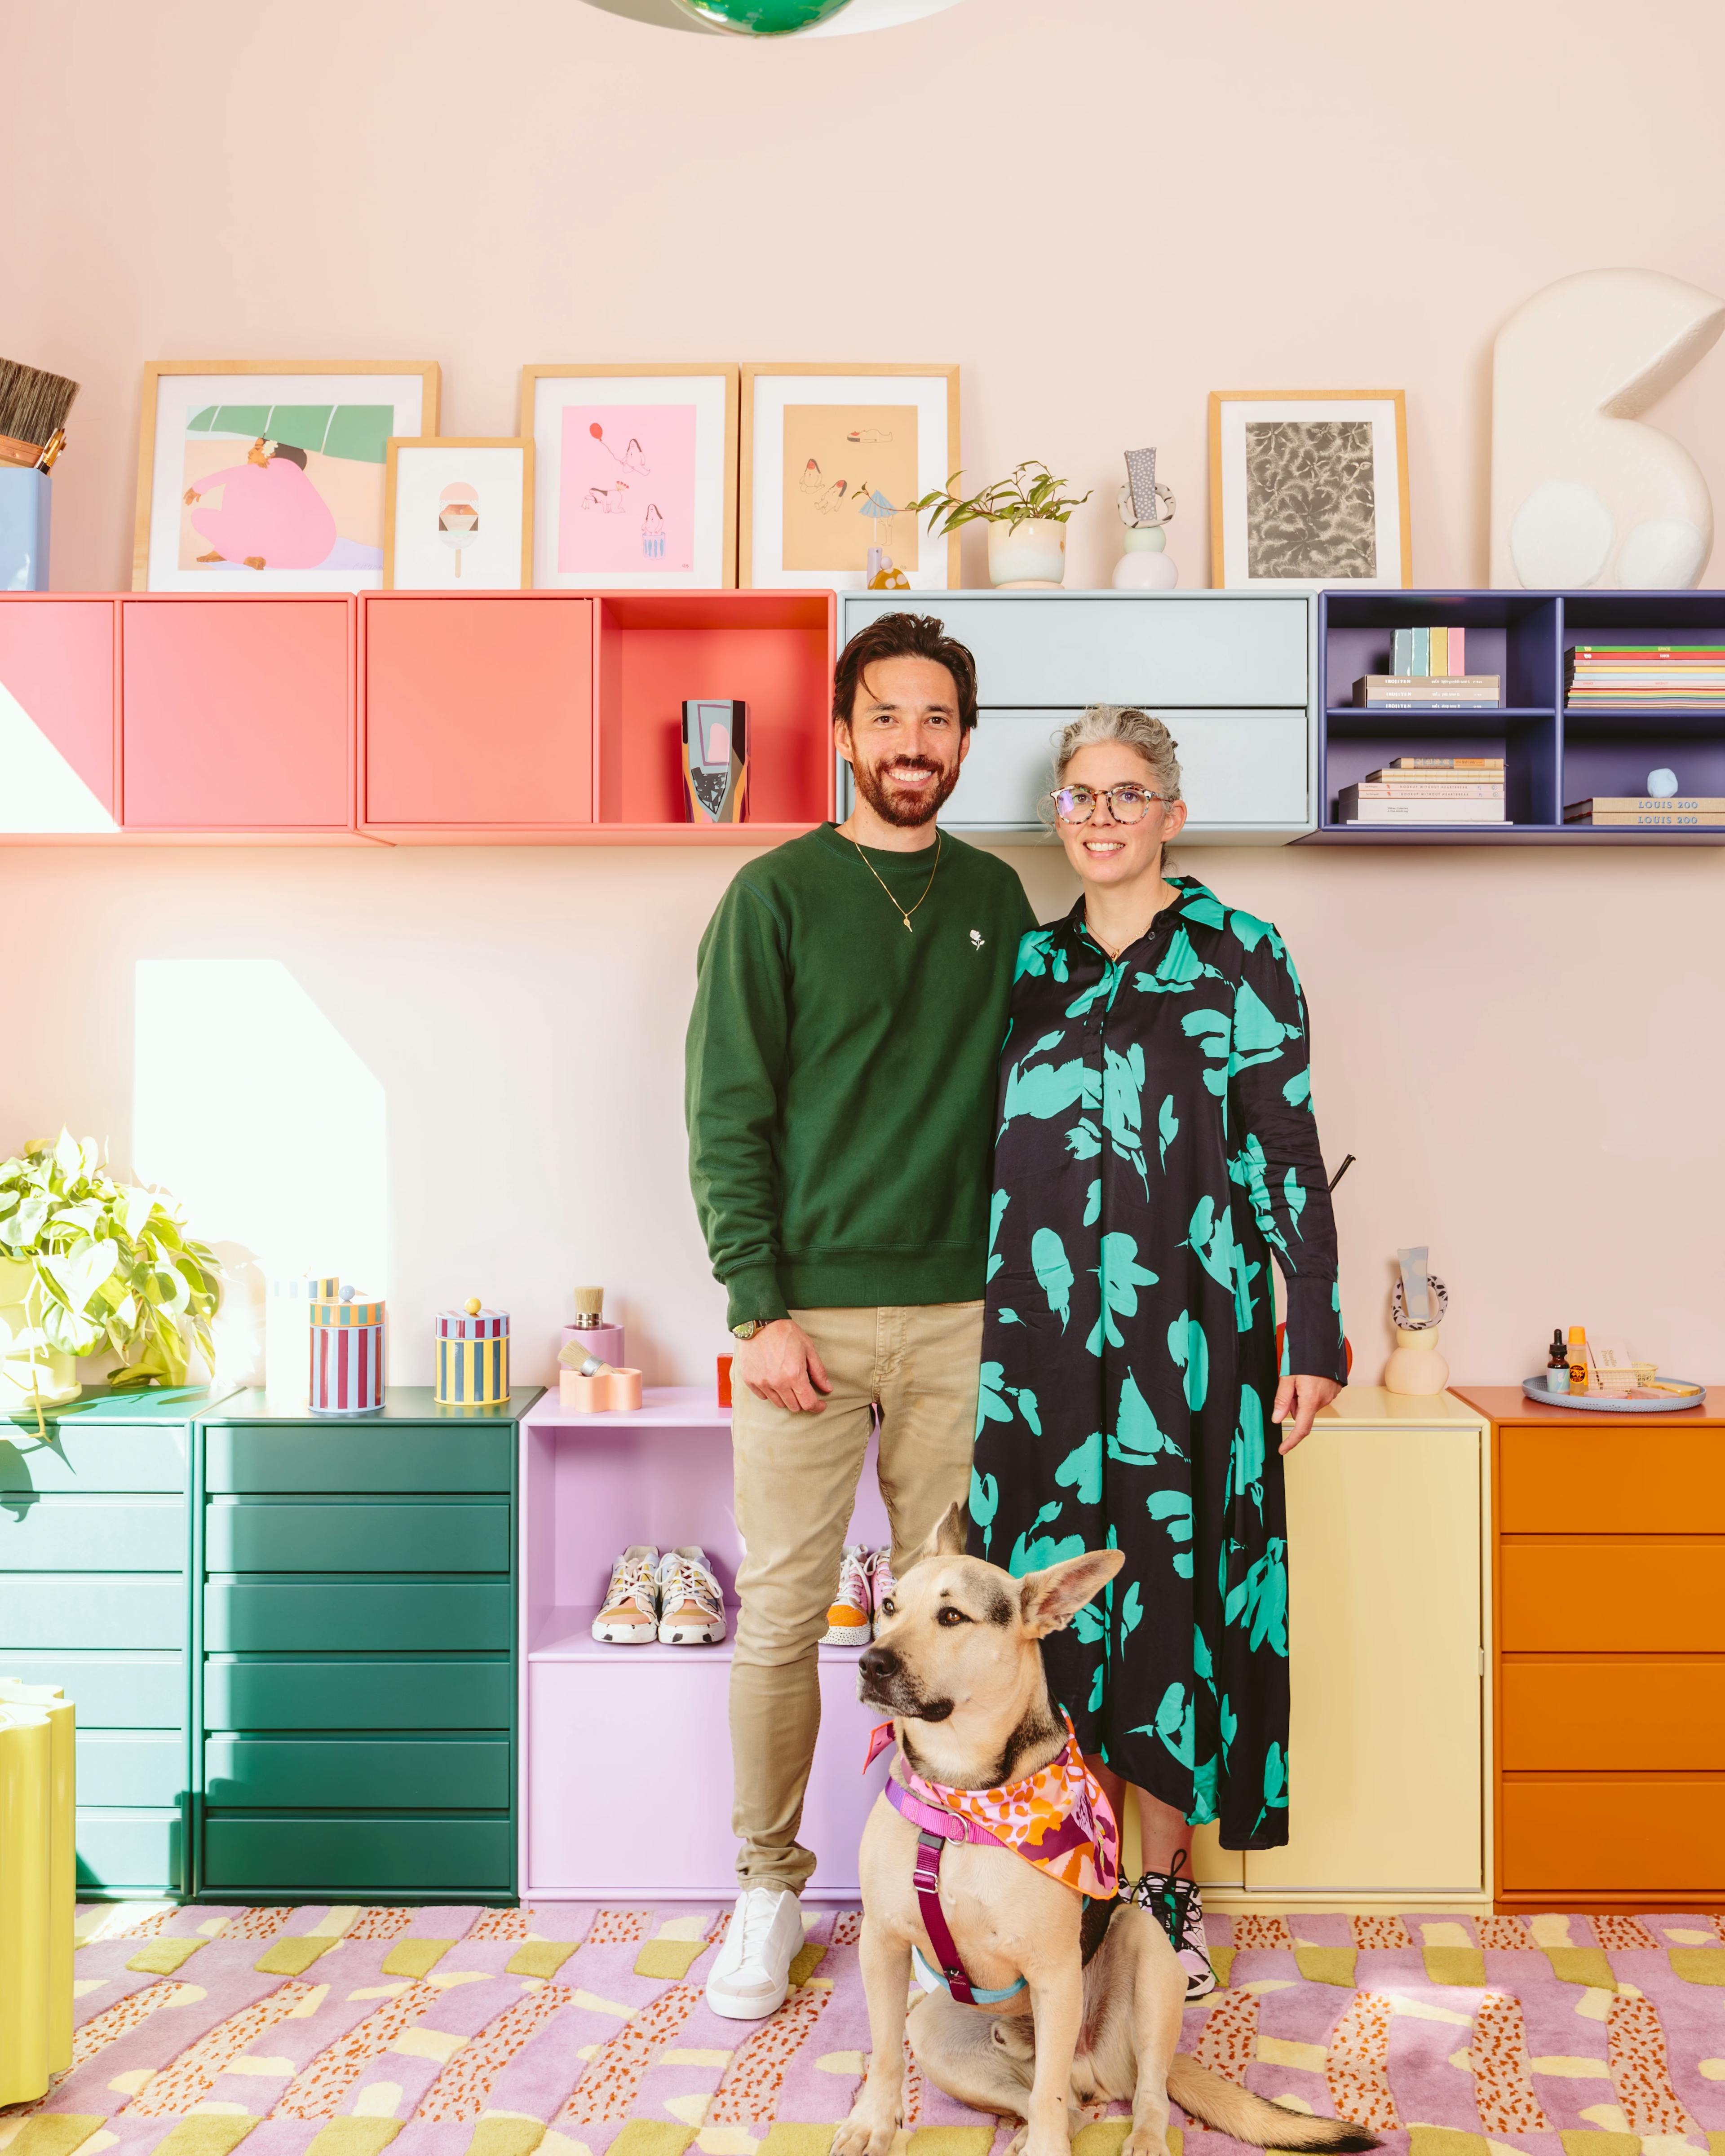 Artist Alex Proba, her husband, and their dog in their colorful Portland, Oregon home. 